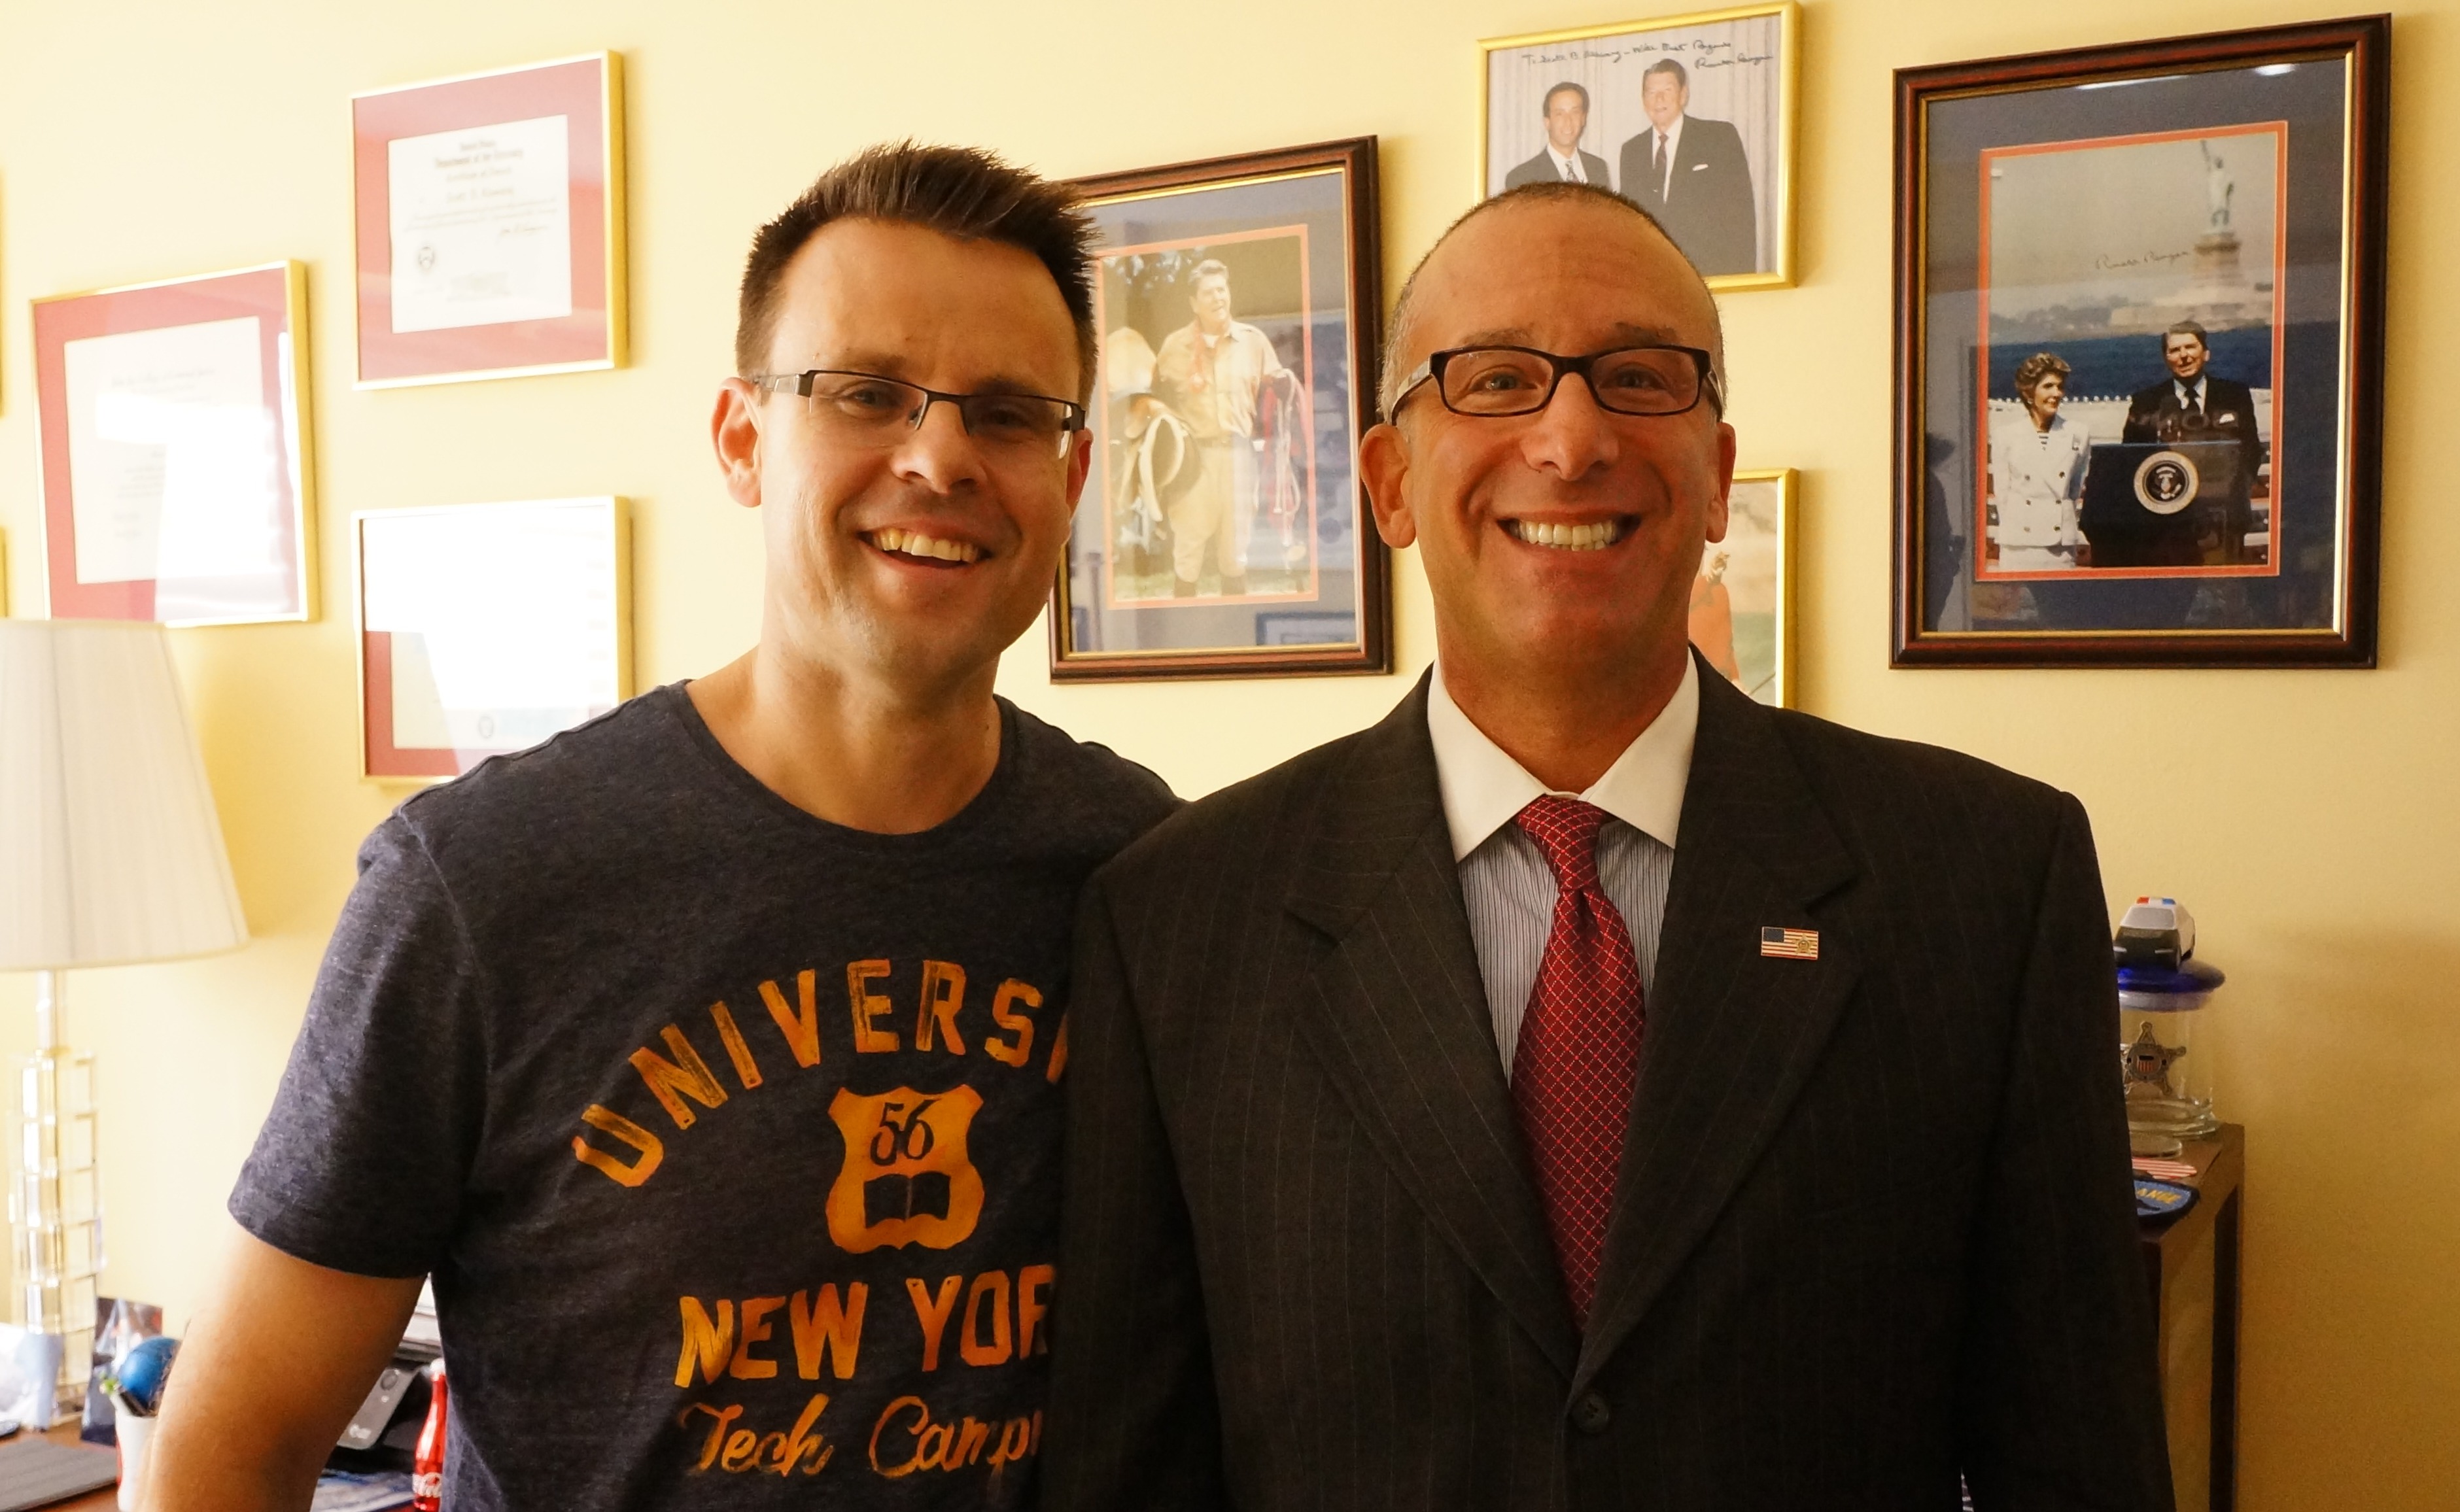 Lincoln Fenner with ex-US Presidential Secret Service Agent Scott Alswang in New York City.